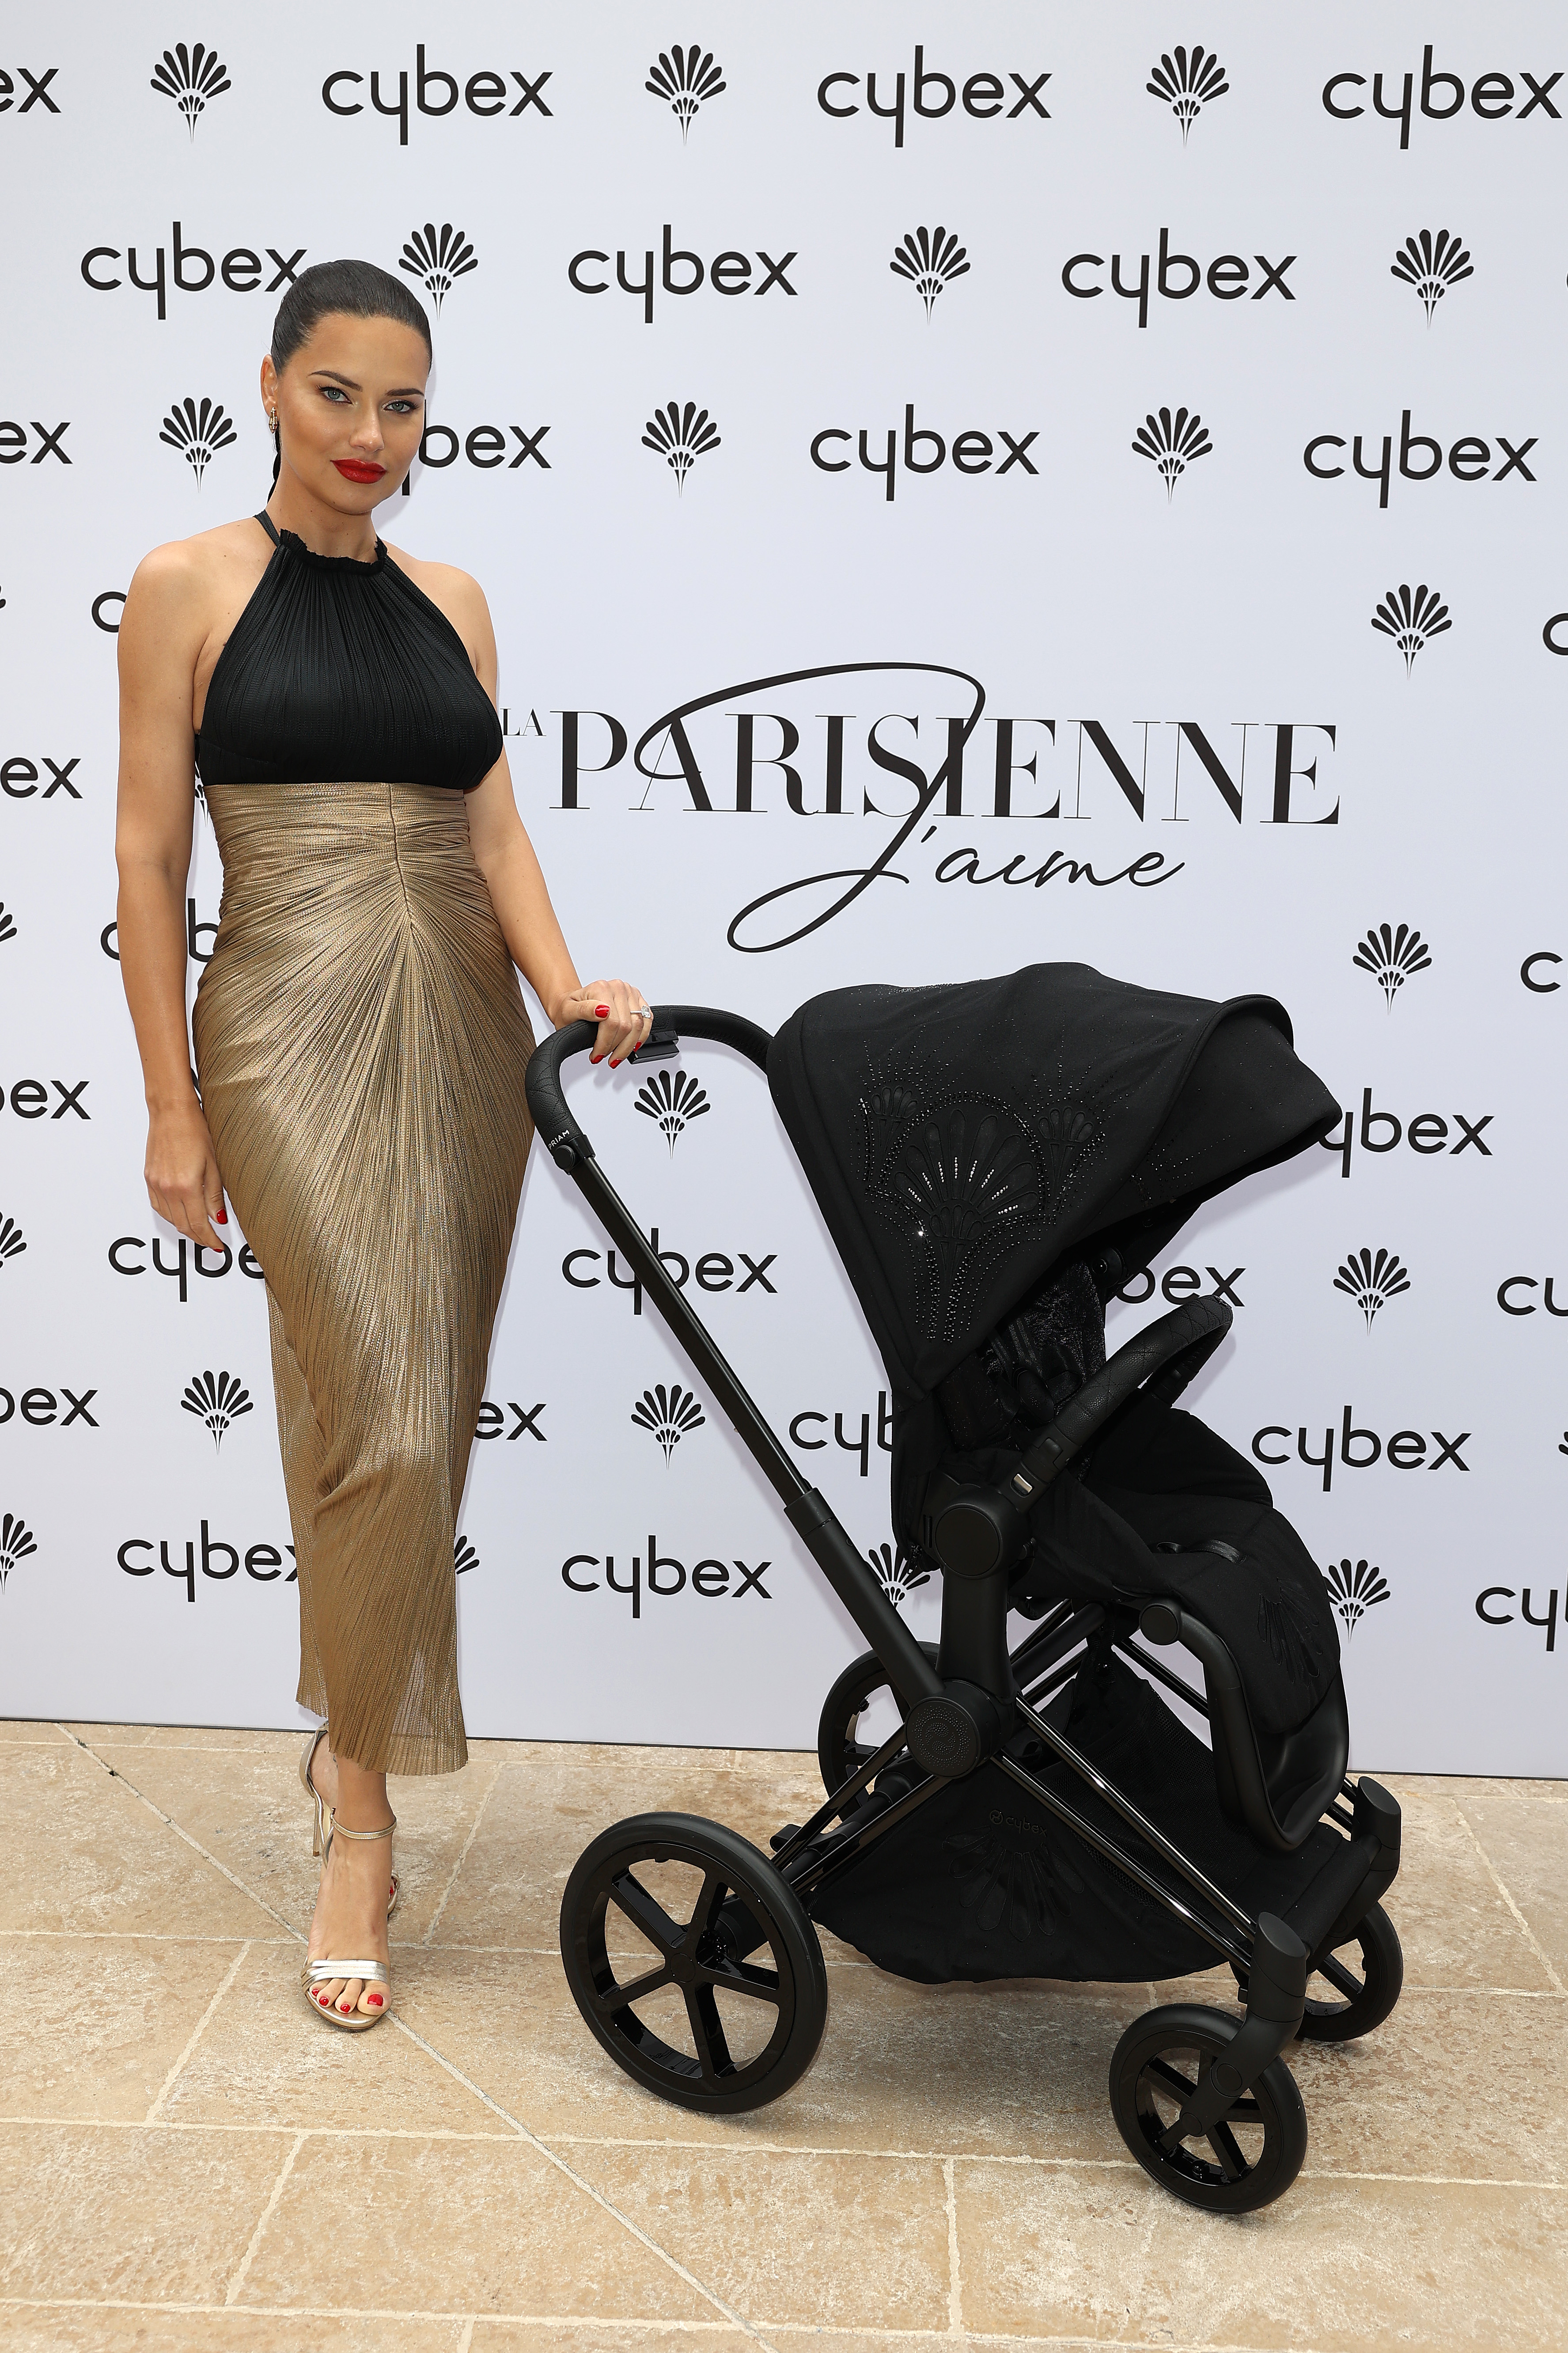 Adriana poses at an event with her baby stroller